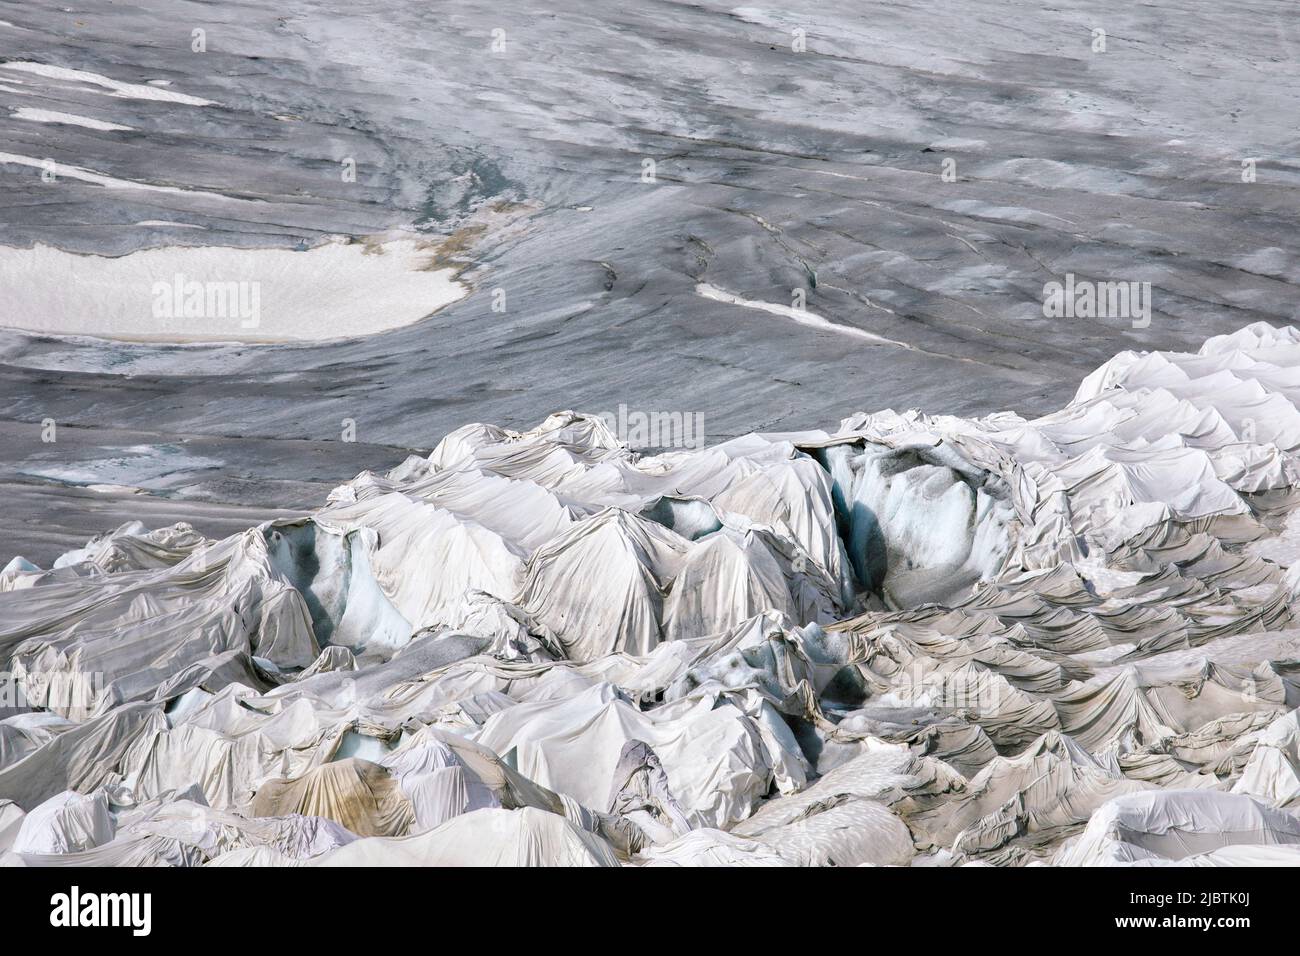 Swiss Rhone glacier cover with blanket protection prevent glacier melting. Save cover against global warming on melting Rhonegletscher in swiss Alps. Stock Photo